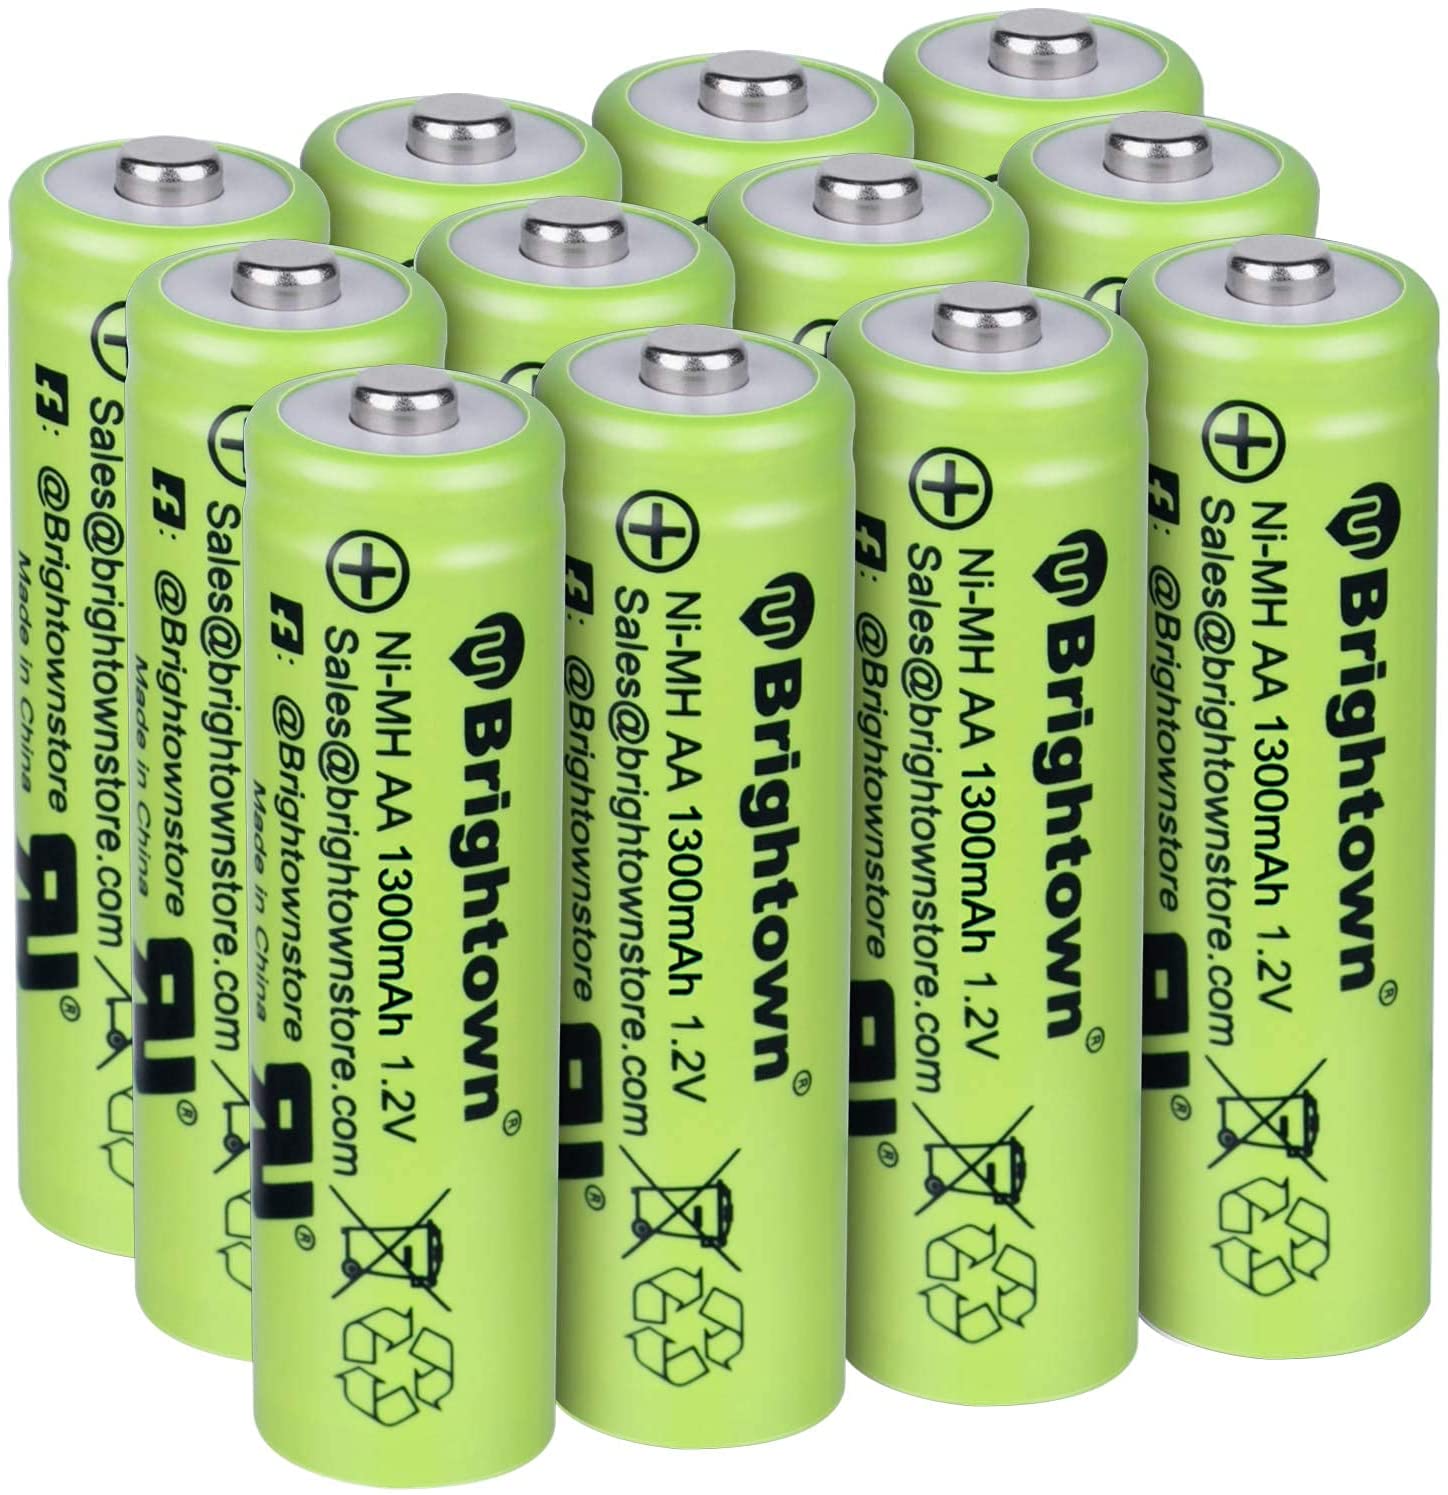 Brightown 1.2V Rechargeable NiMH AA Batteries, 12-Pack